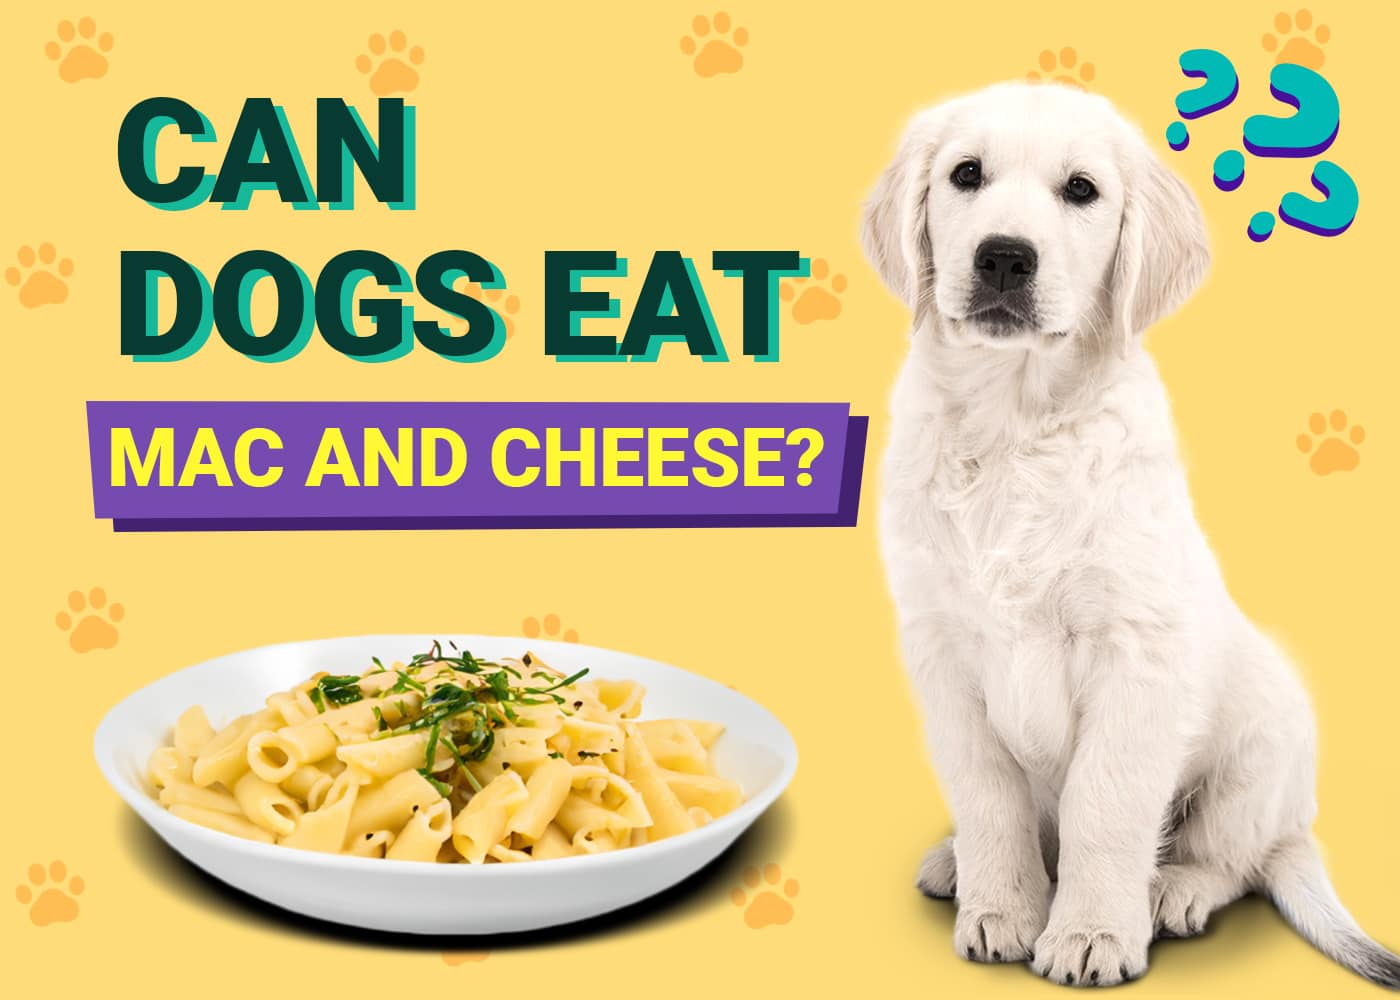 Can Dogs Eat Mac and Cheese